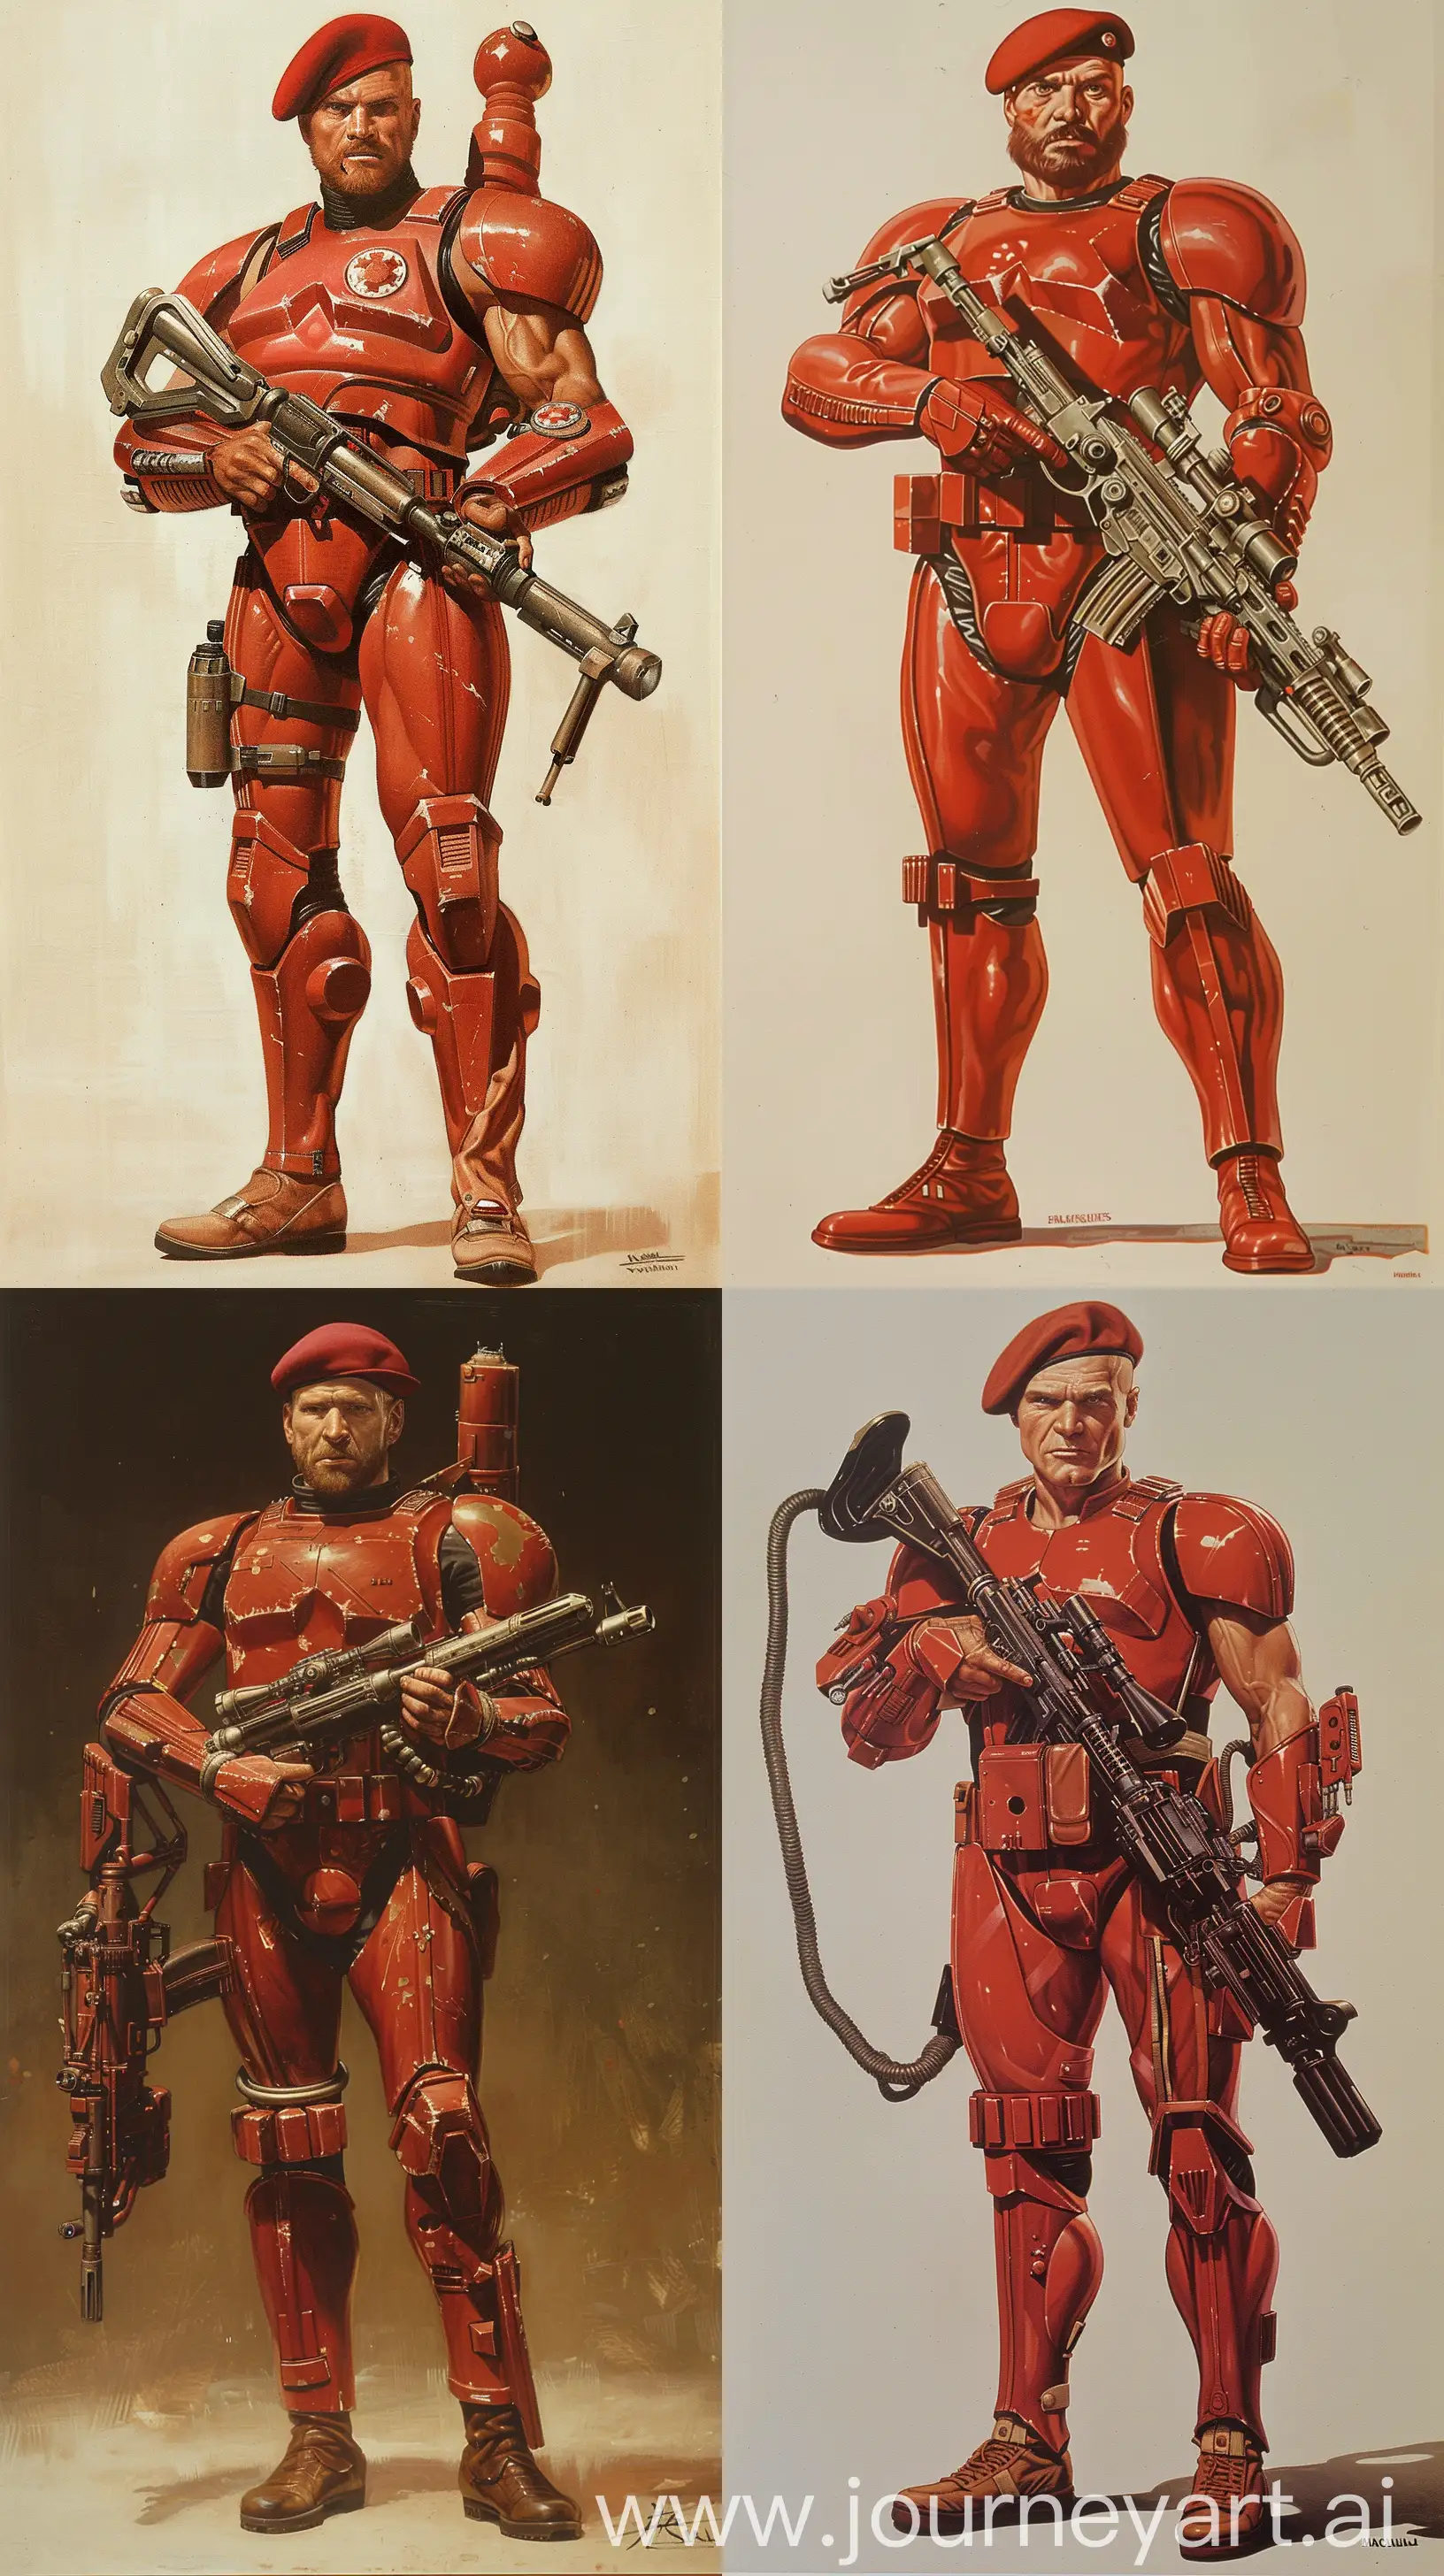 Tall-Bald-Man-in-Red-Stormtrooper-Armor-with-Futuristic-Rifle